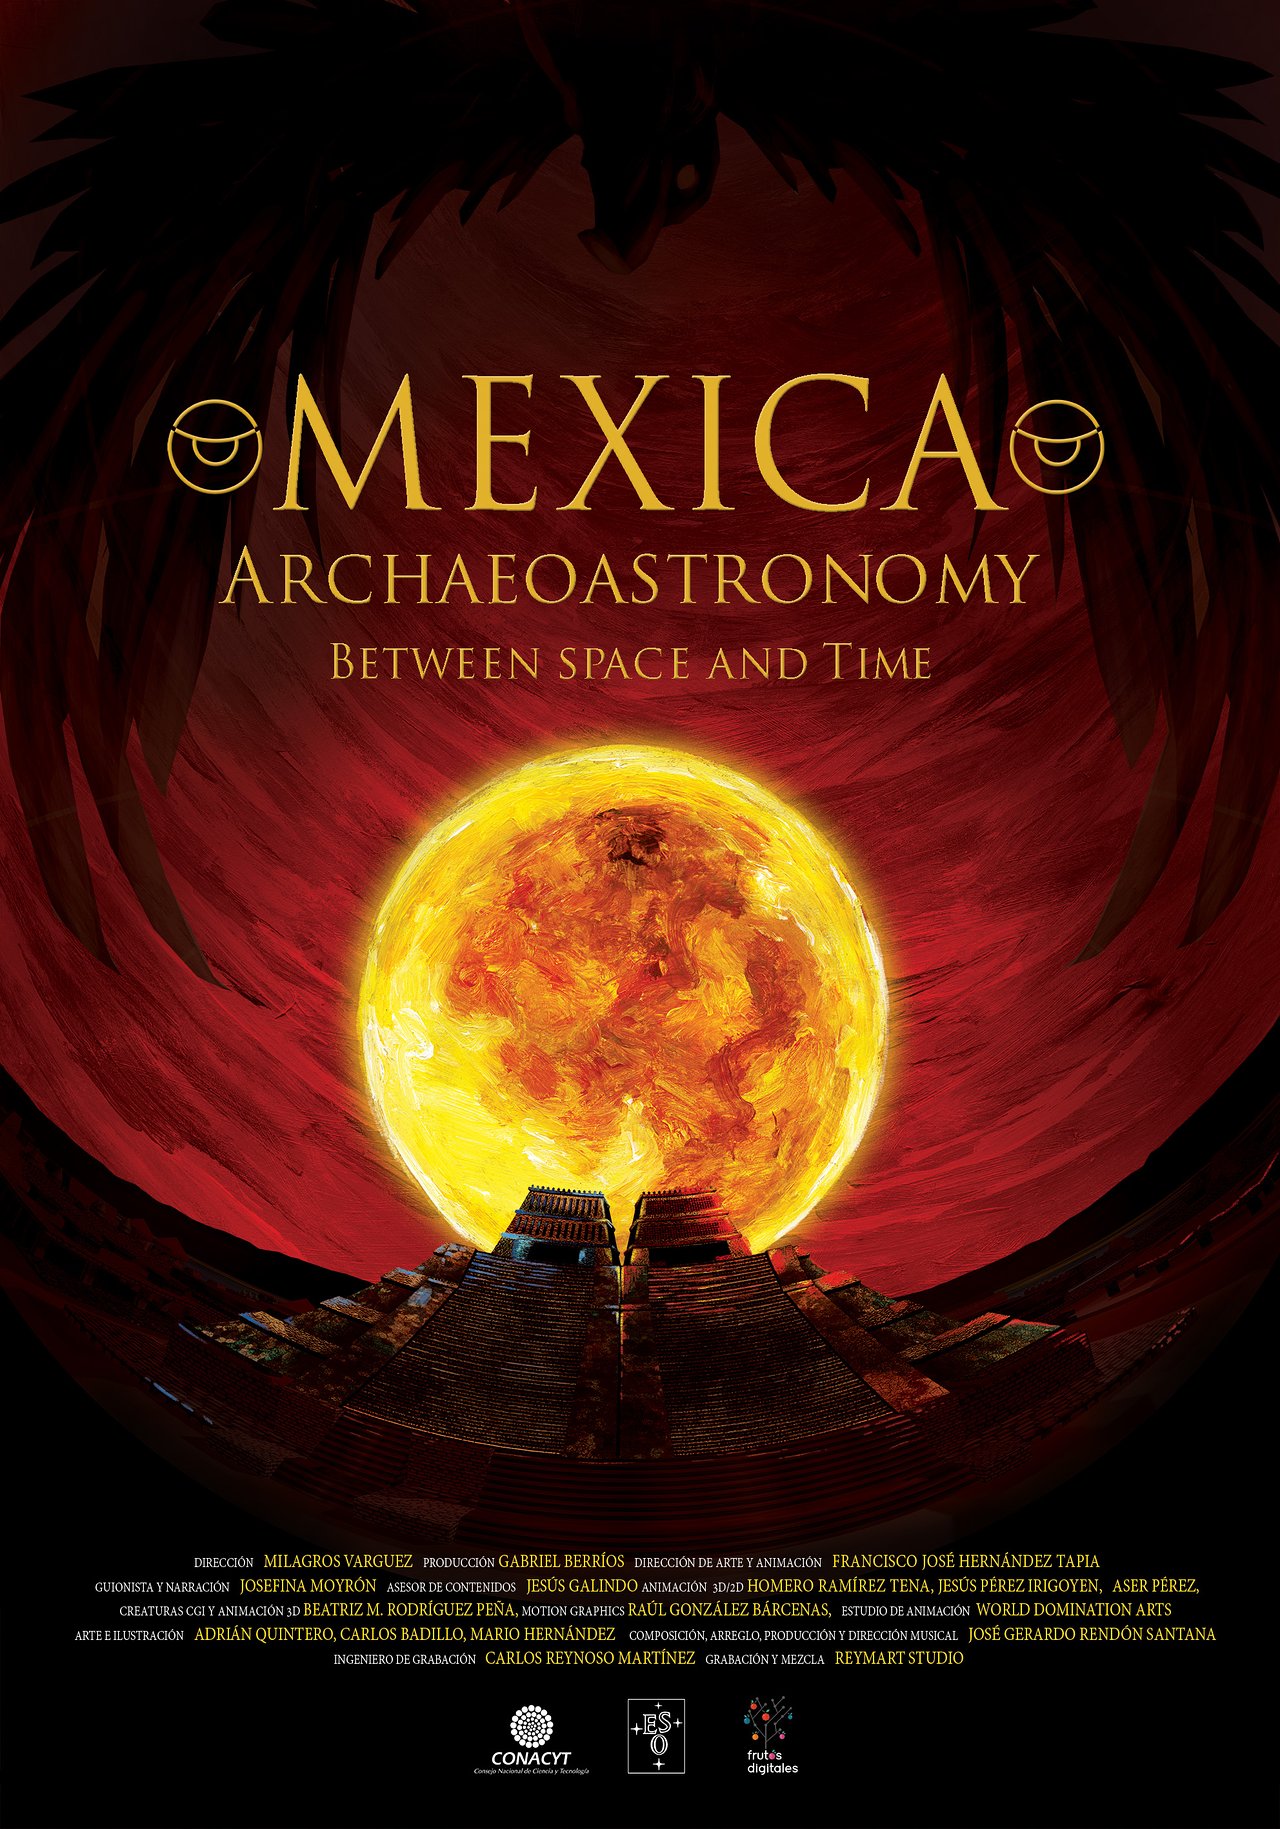 Mexica Archaeoastronomy: Between Space and Time